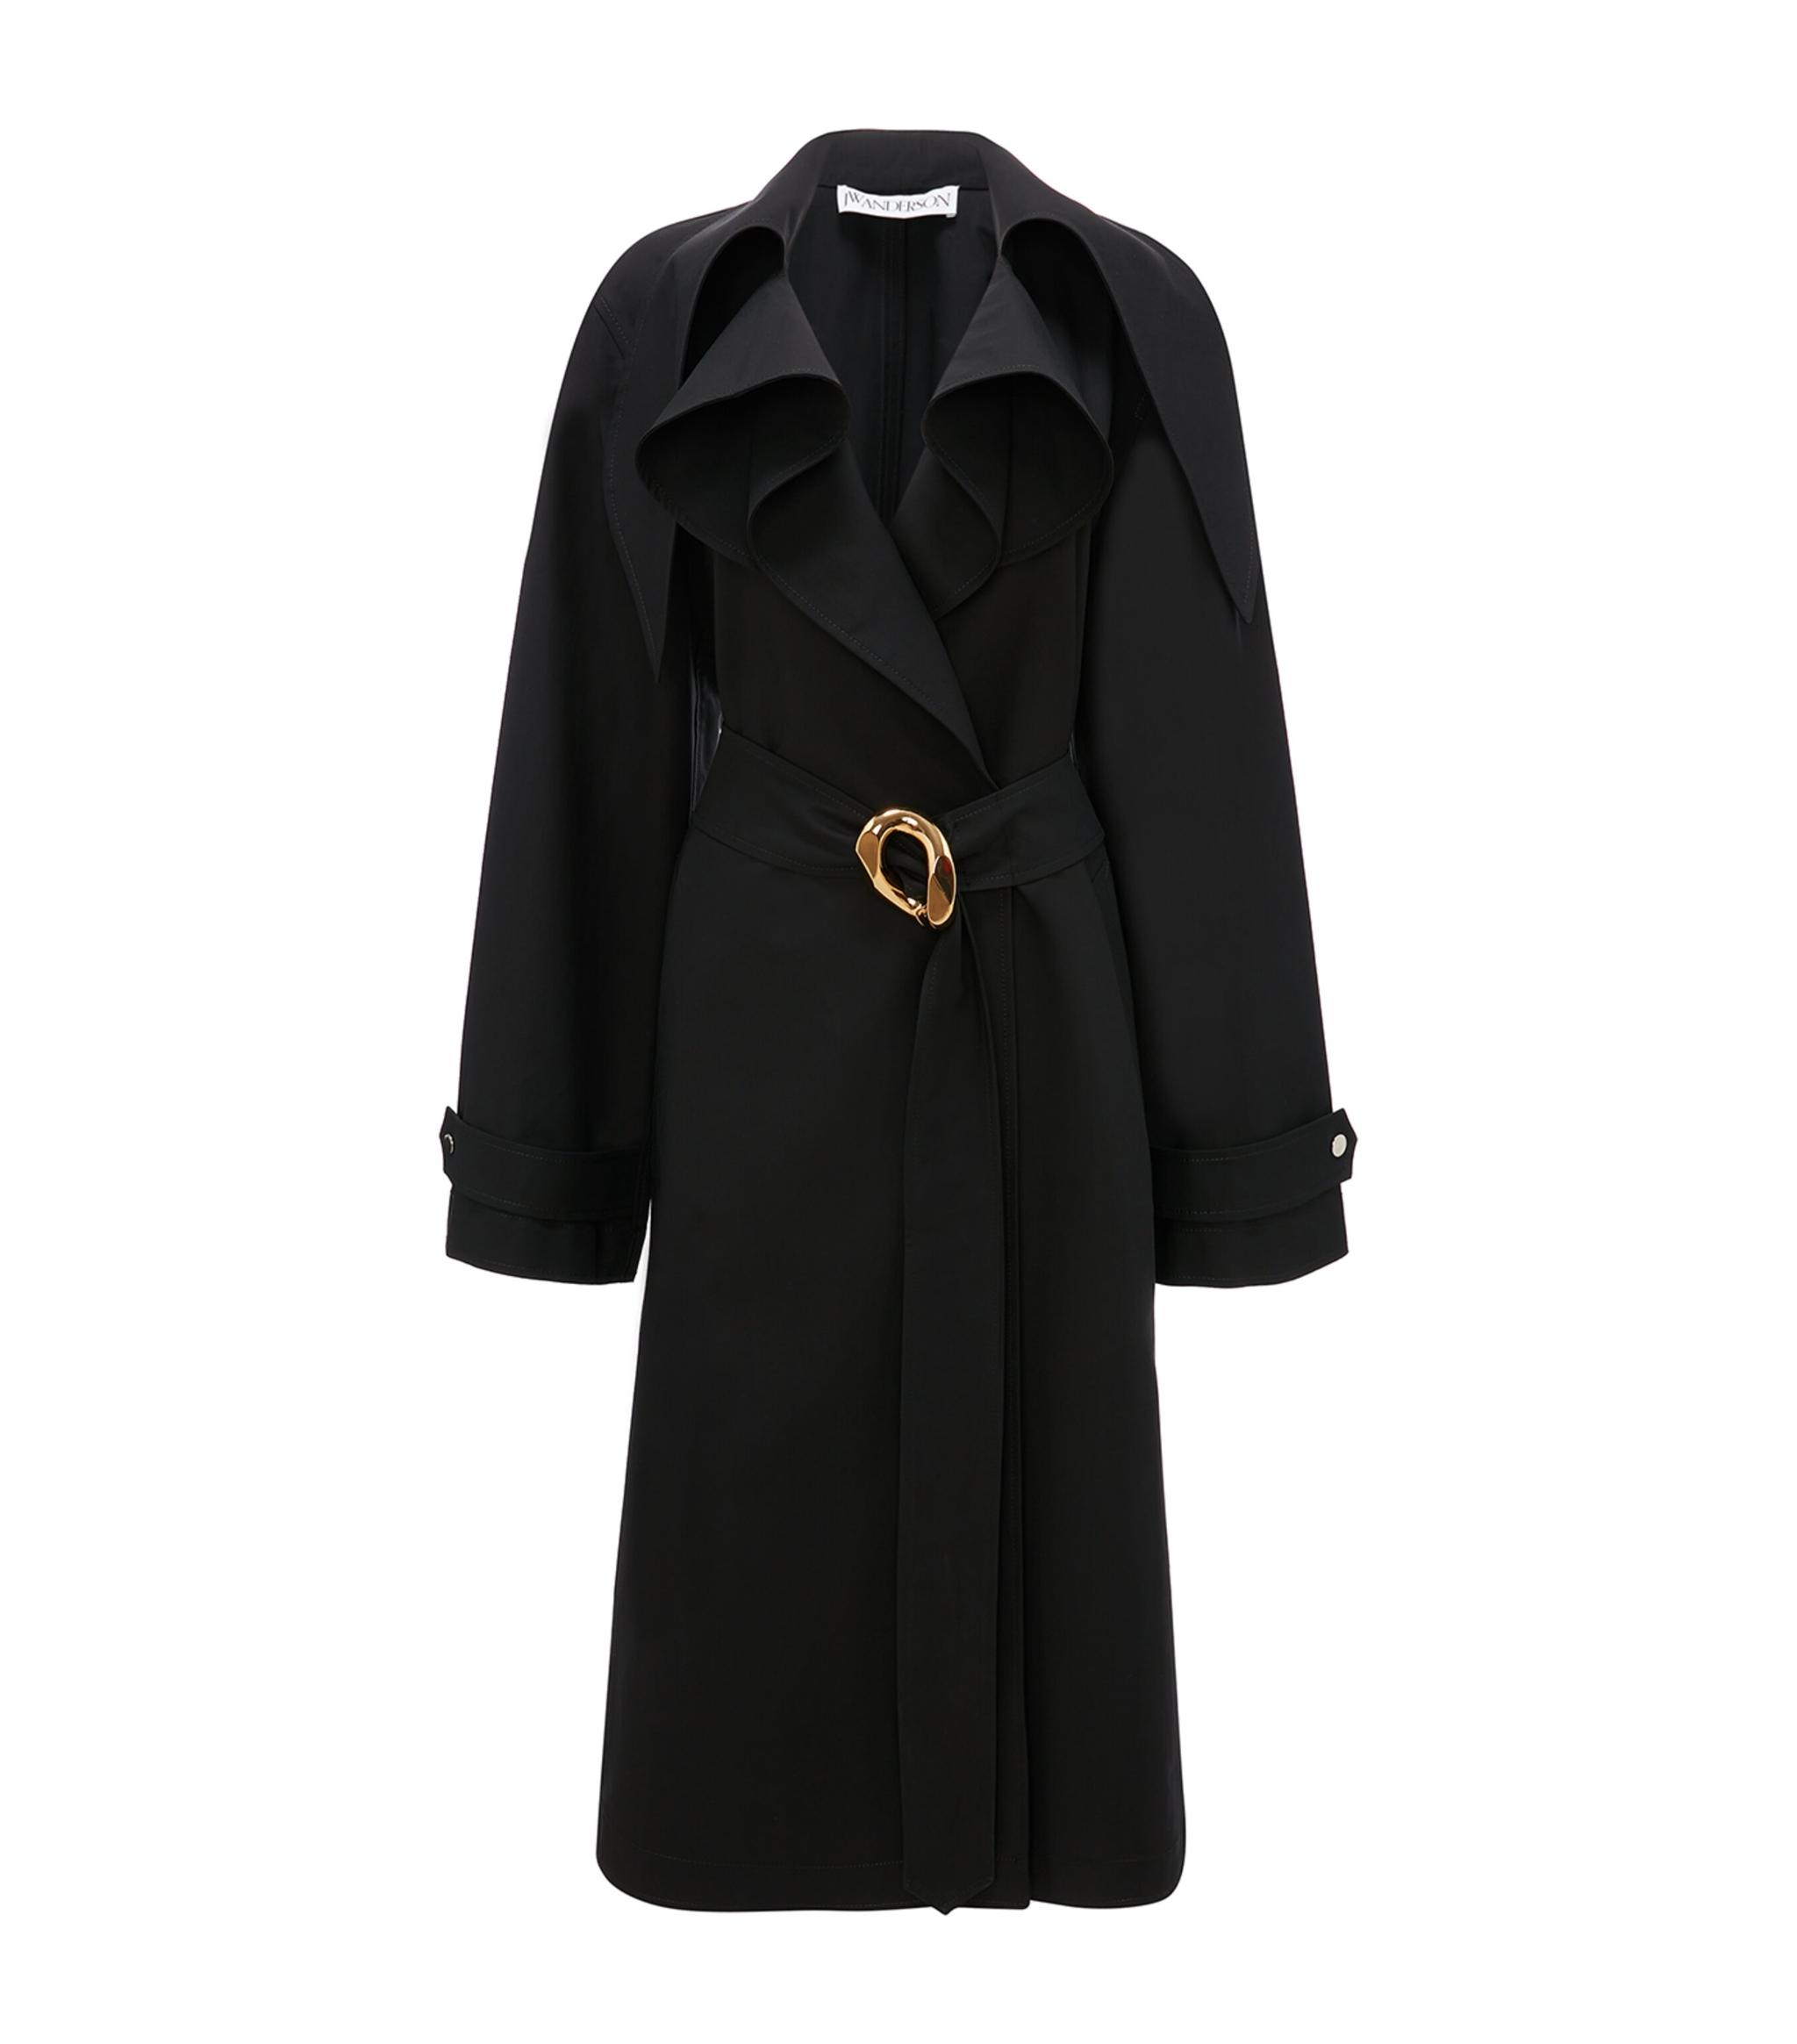 JW Anderson Chain-link Trench Coat in Black | Lyst